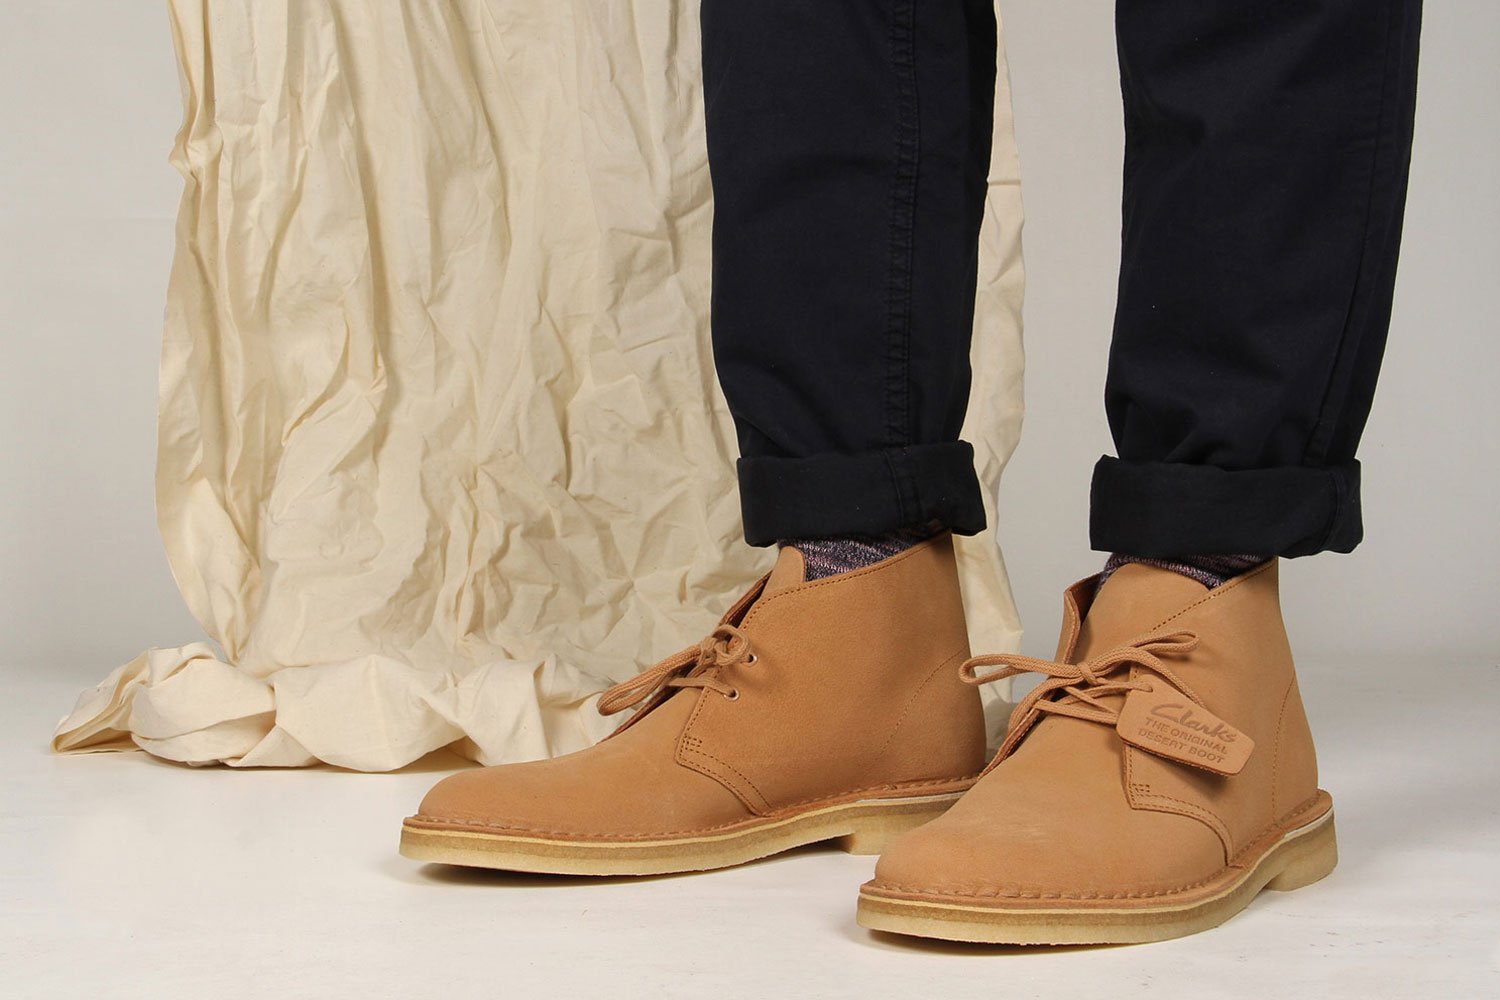 How Style a Clarks Desert Boot | Aphrodite Clothing Blog